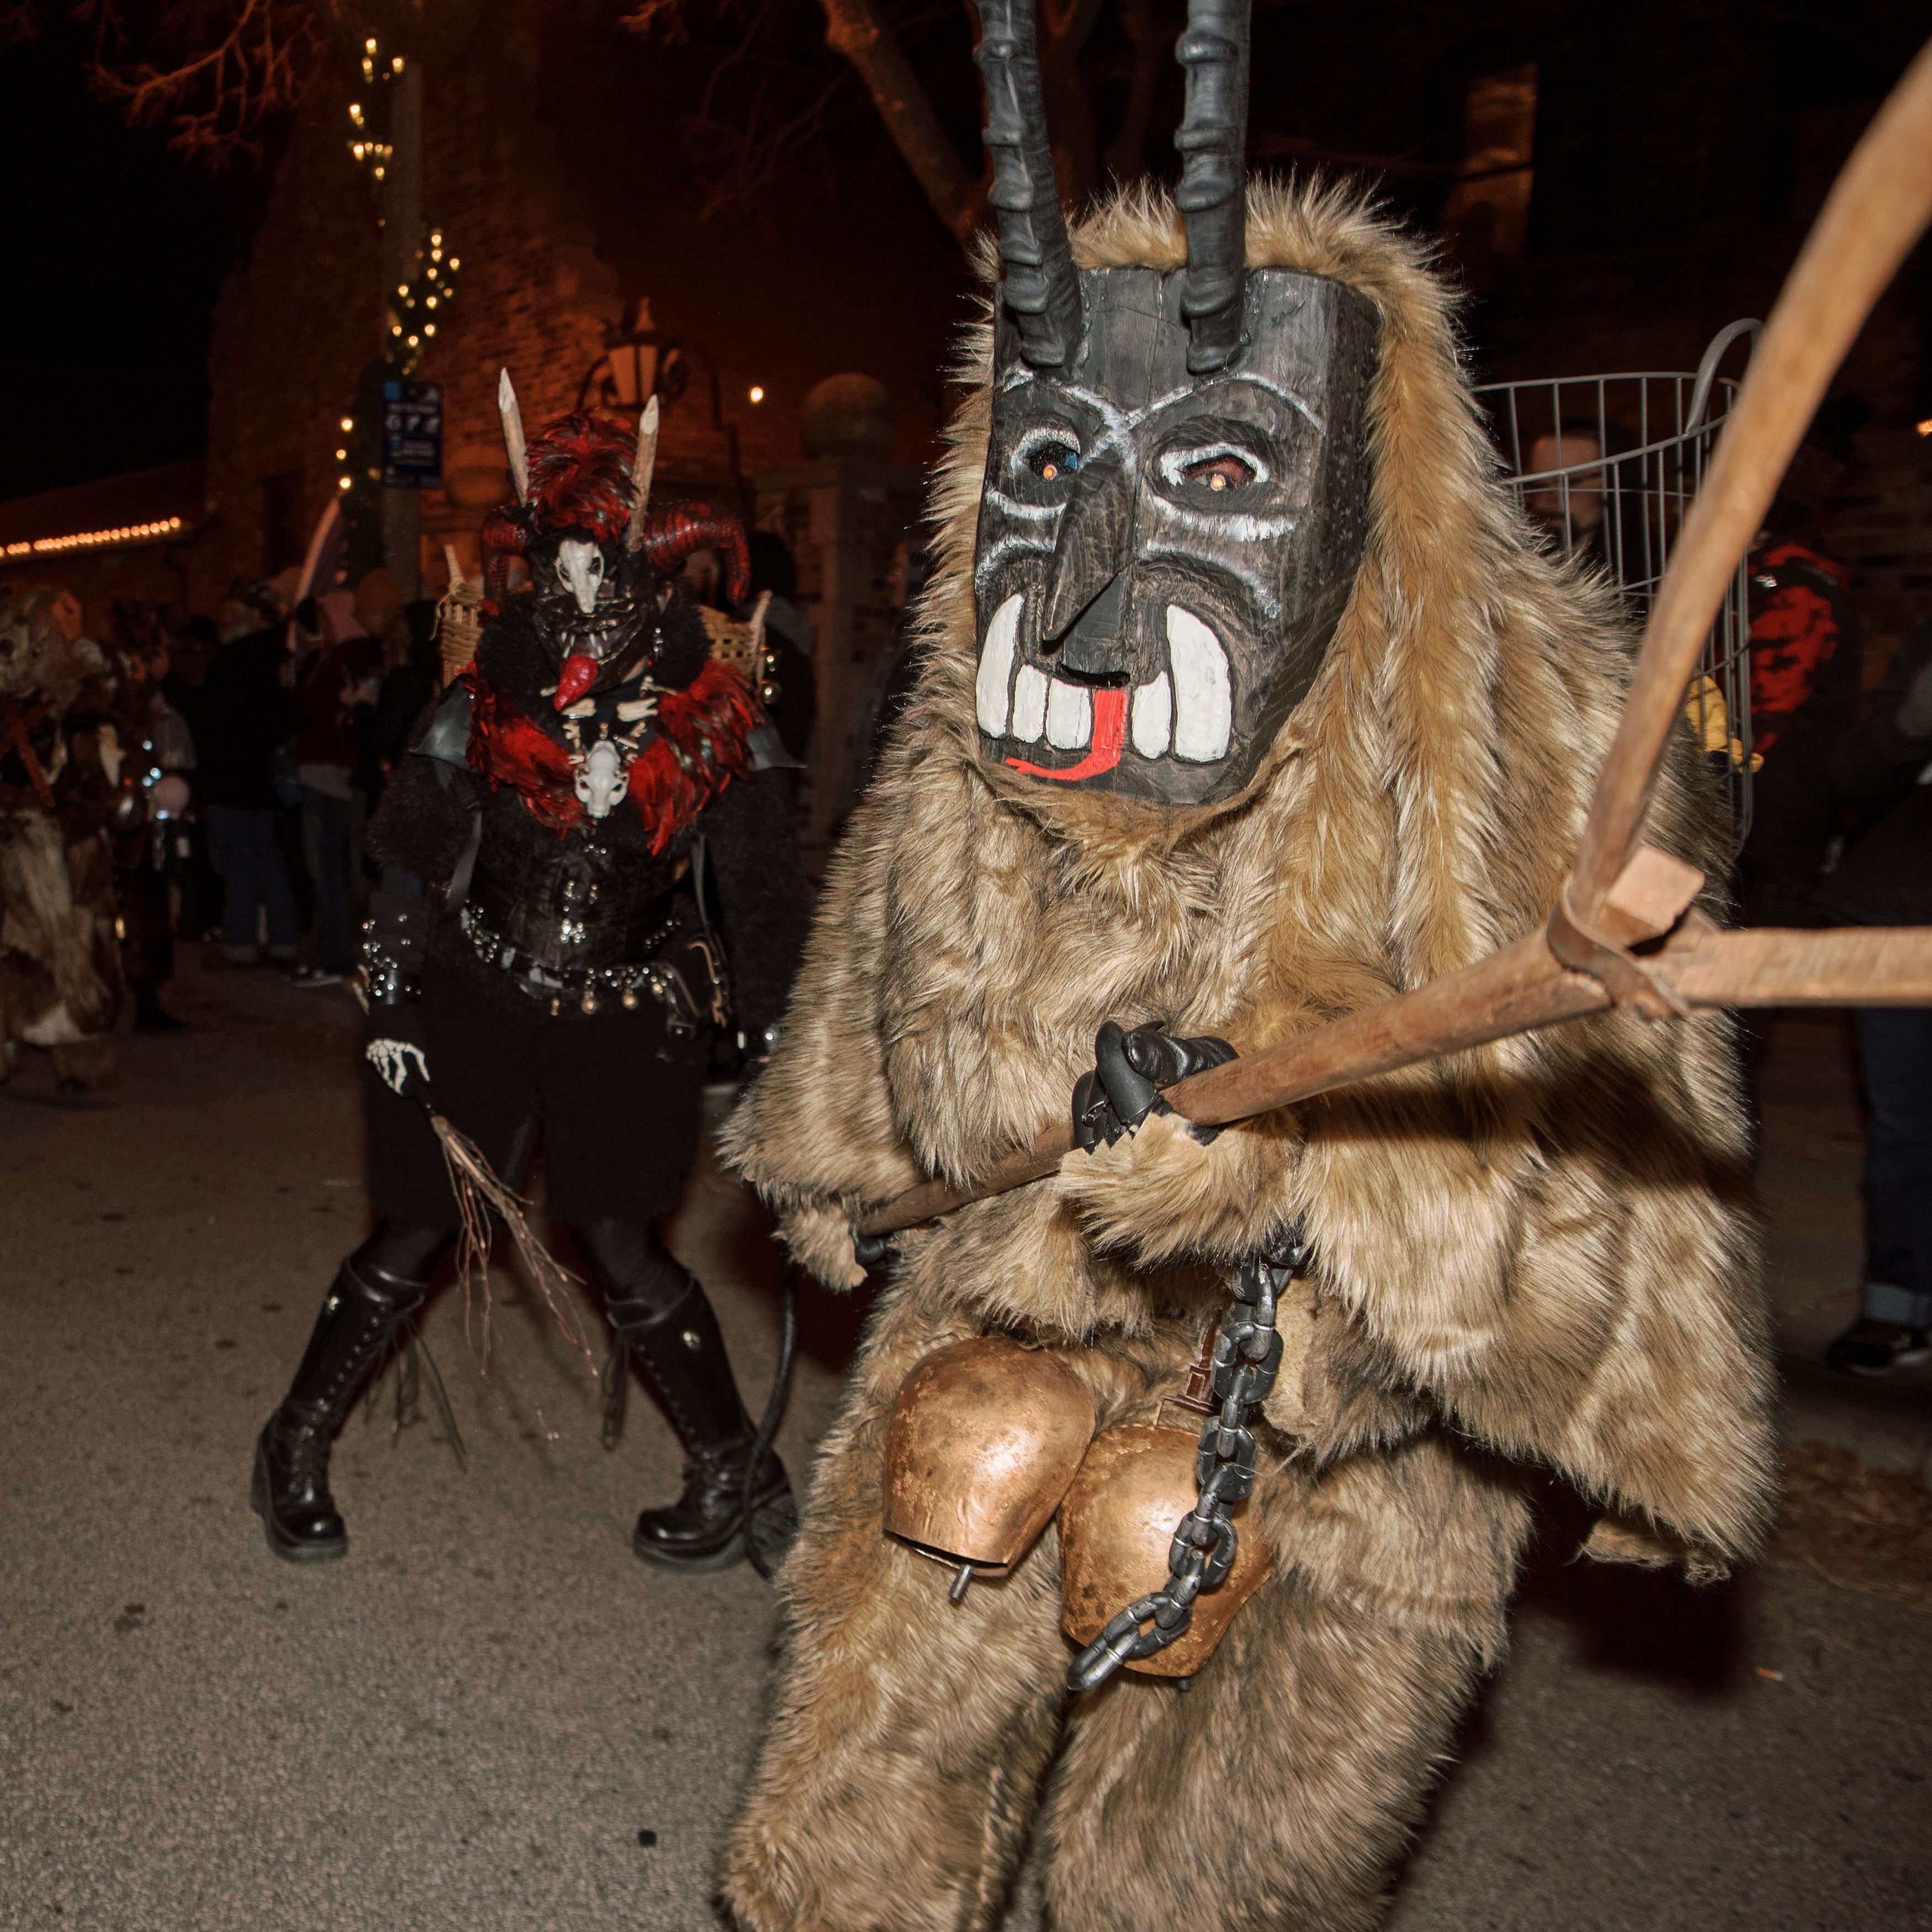 A member of the Milwaukee Krampus Eigenheit (foreground) sports a heavy, two-foot-long wooden mask similar to some of the styles worn in the Alpine birthplace of the tradition.